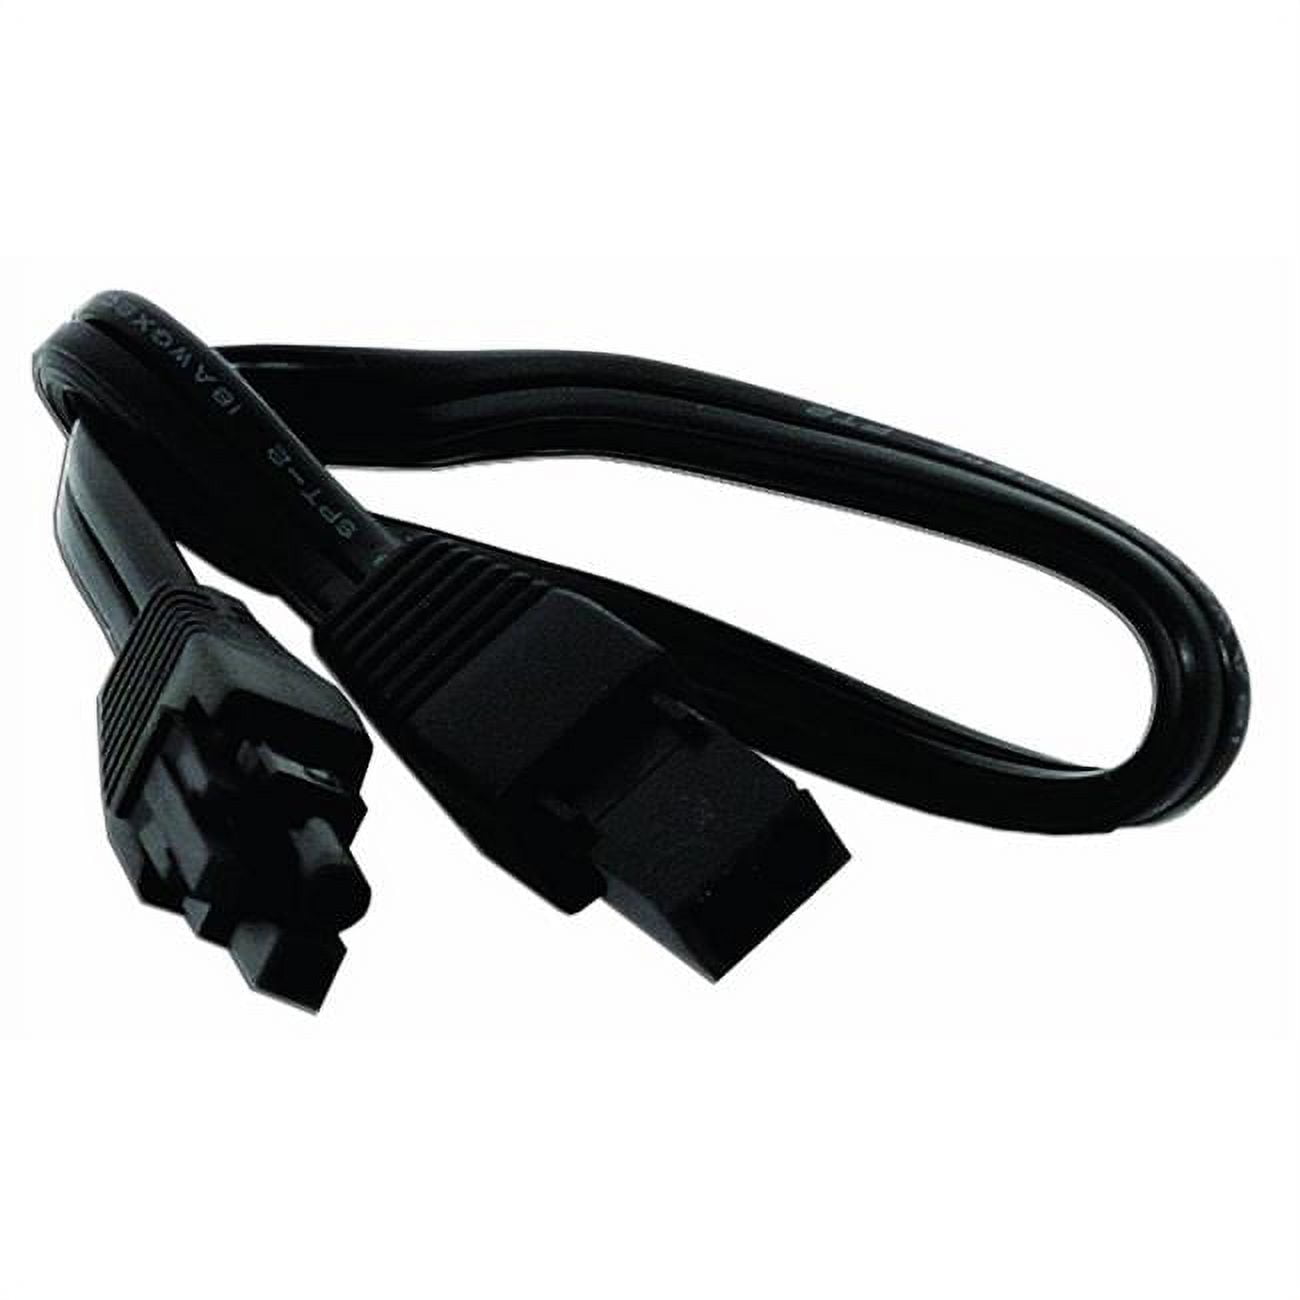 Picture of AmericanLighting ALLVPEX12-B 12 in. Linkable Extension for 120 V Xenon Puck Light, Black